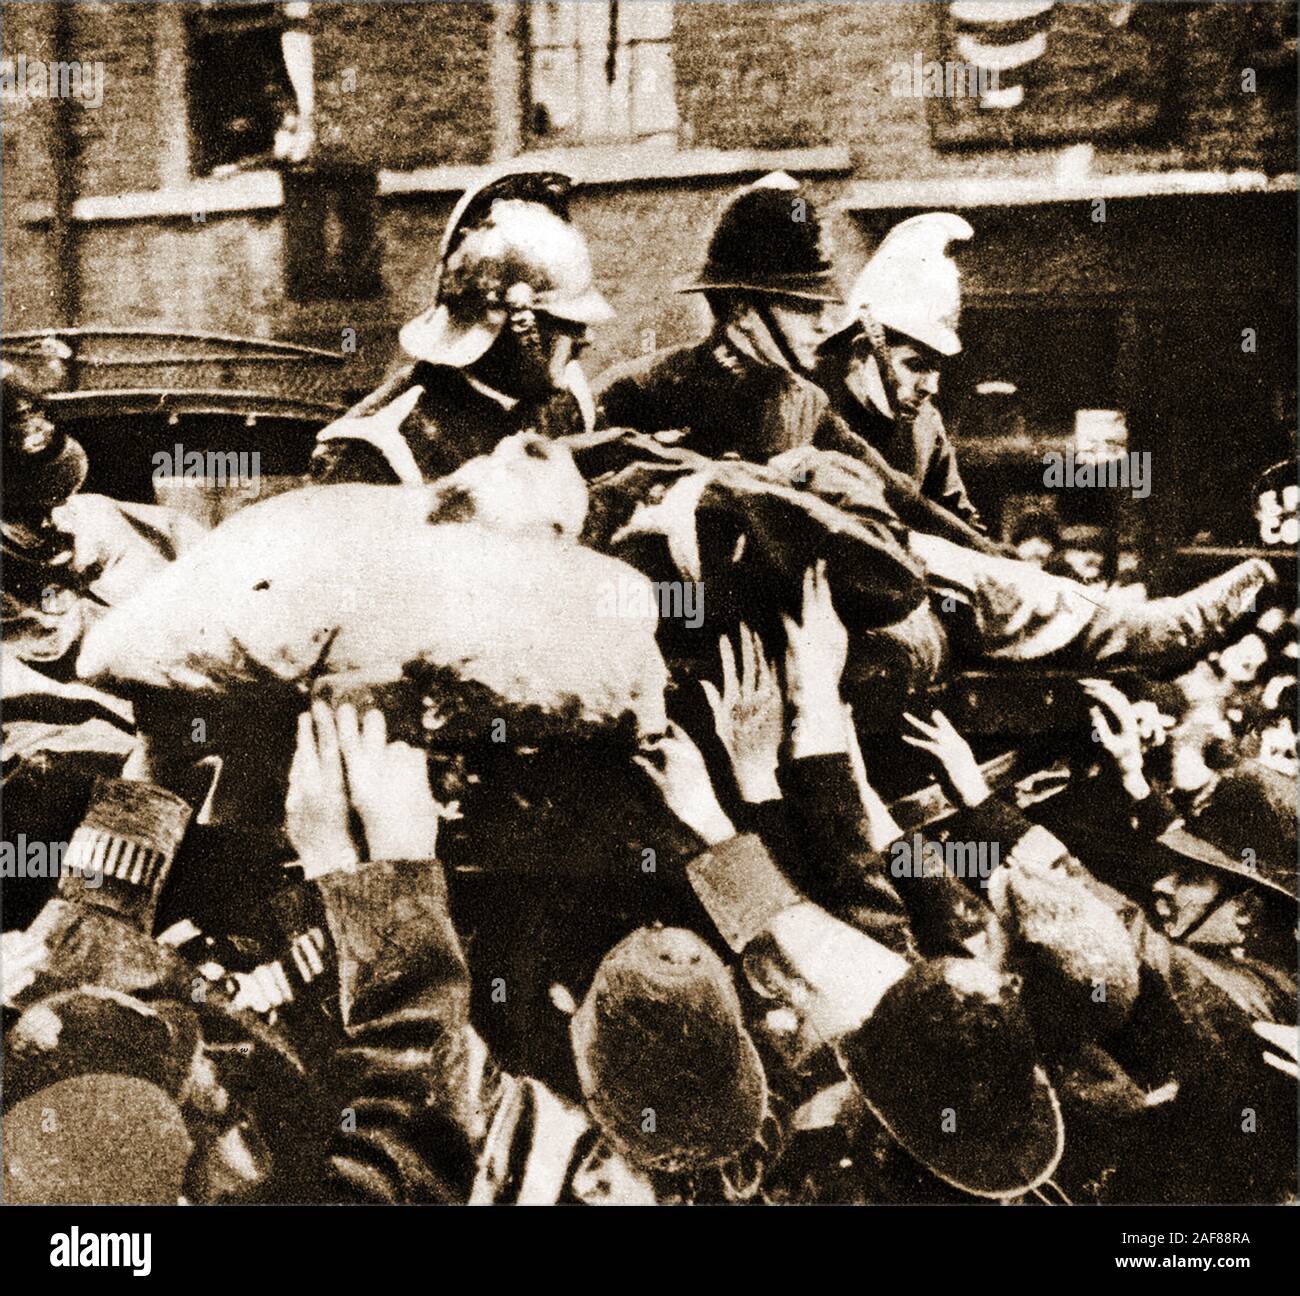 Seige of Sidney Street -The Siege of Sidney Street (January 1911), also known as the Battle of Stepney, took part in the  East End of London between British police supported by soldiers, Following a robbery and the killing of three police officers by Latvian revolutionaries. This historic photograph shows firemen and police attend the burning building after the event. Stock Photo